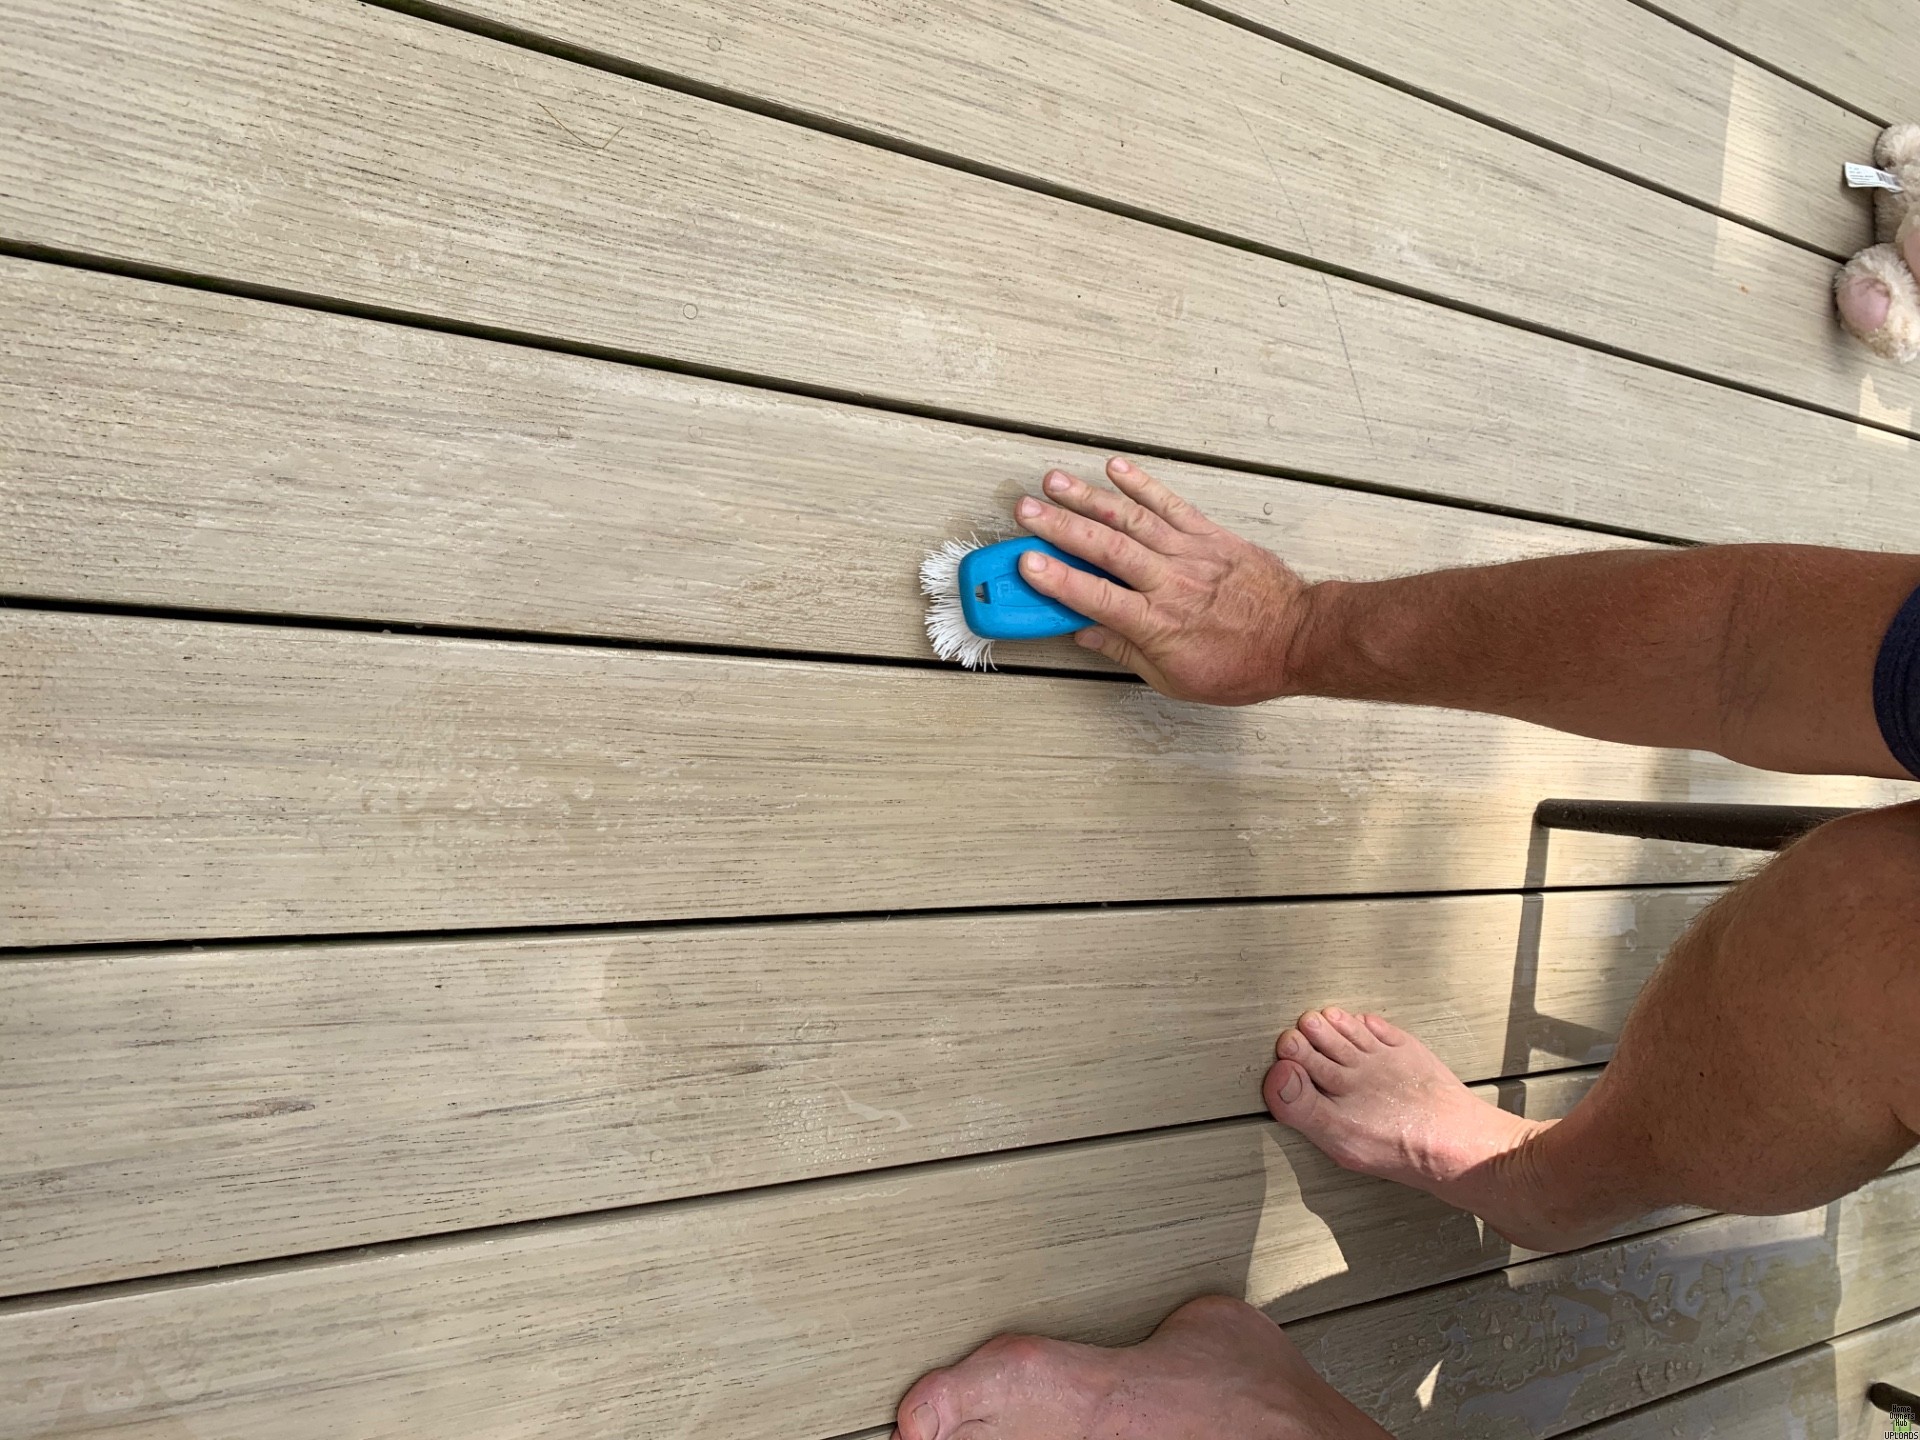 Image for removing wax from deck boards?